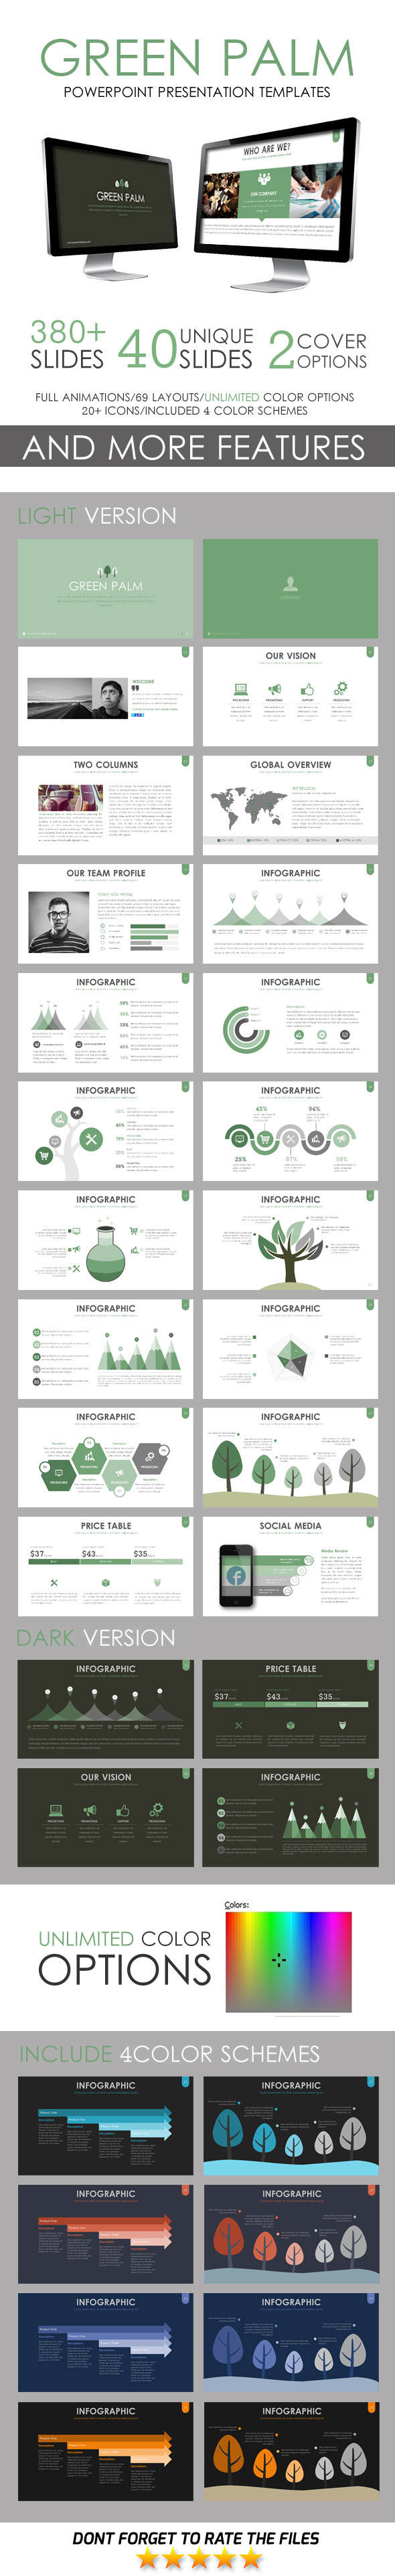 Green Palm PowerPoint Template